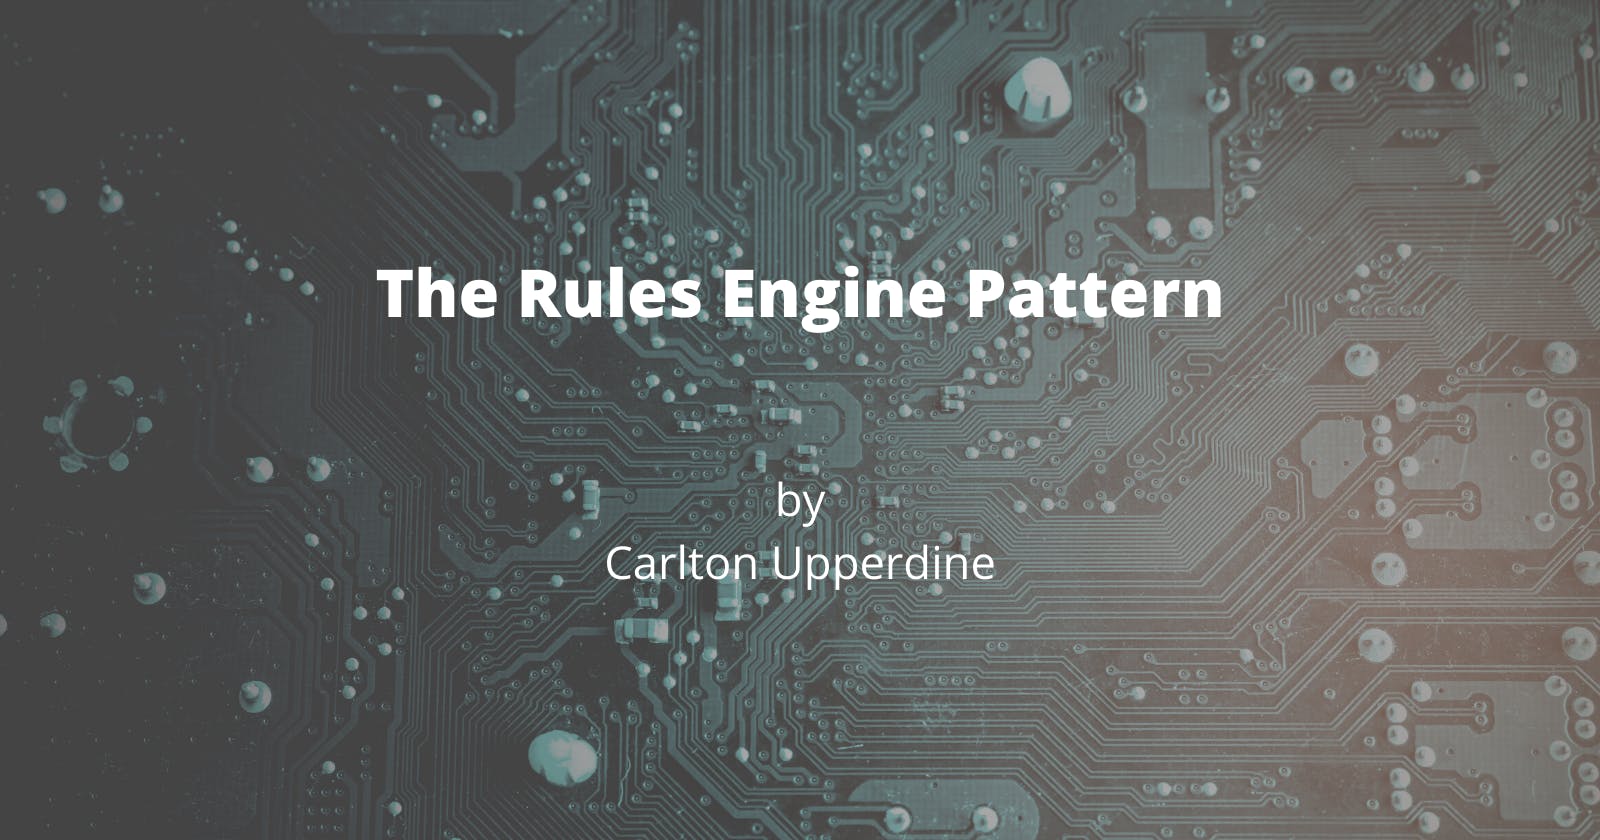 The Rules Engine Pattern